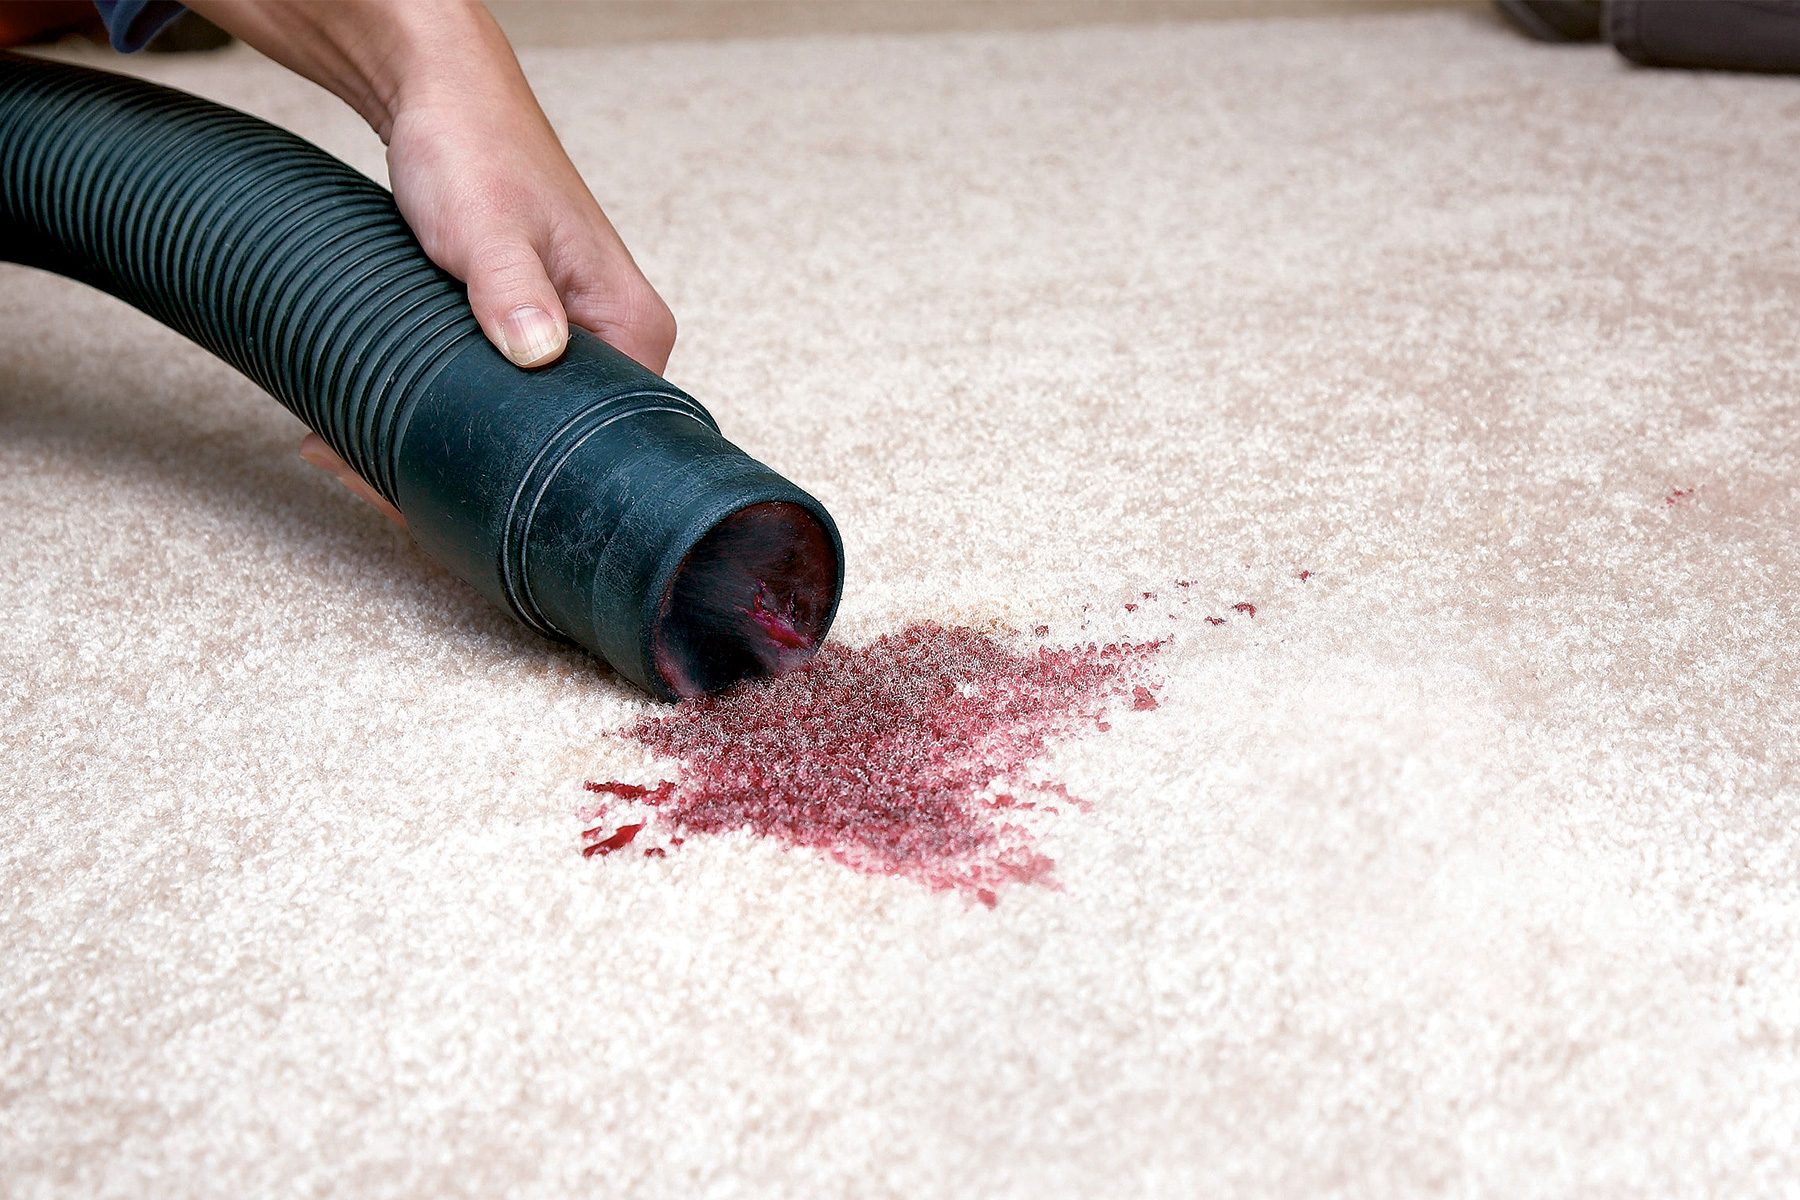 Using Shop vacuum to remove stains from carpet